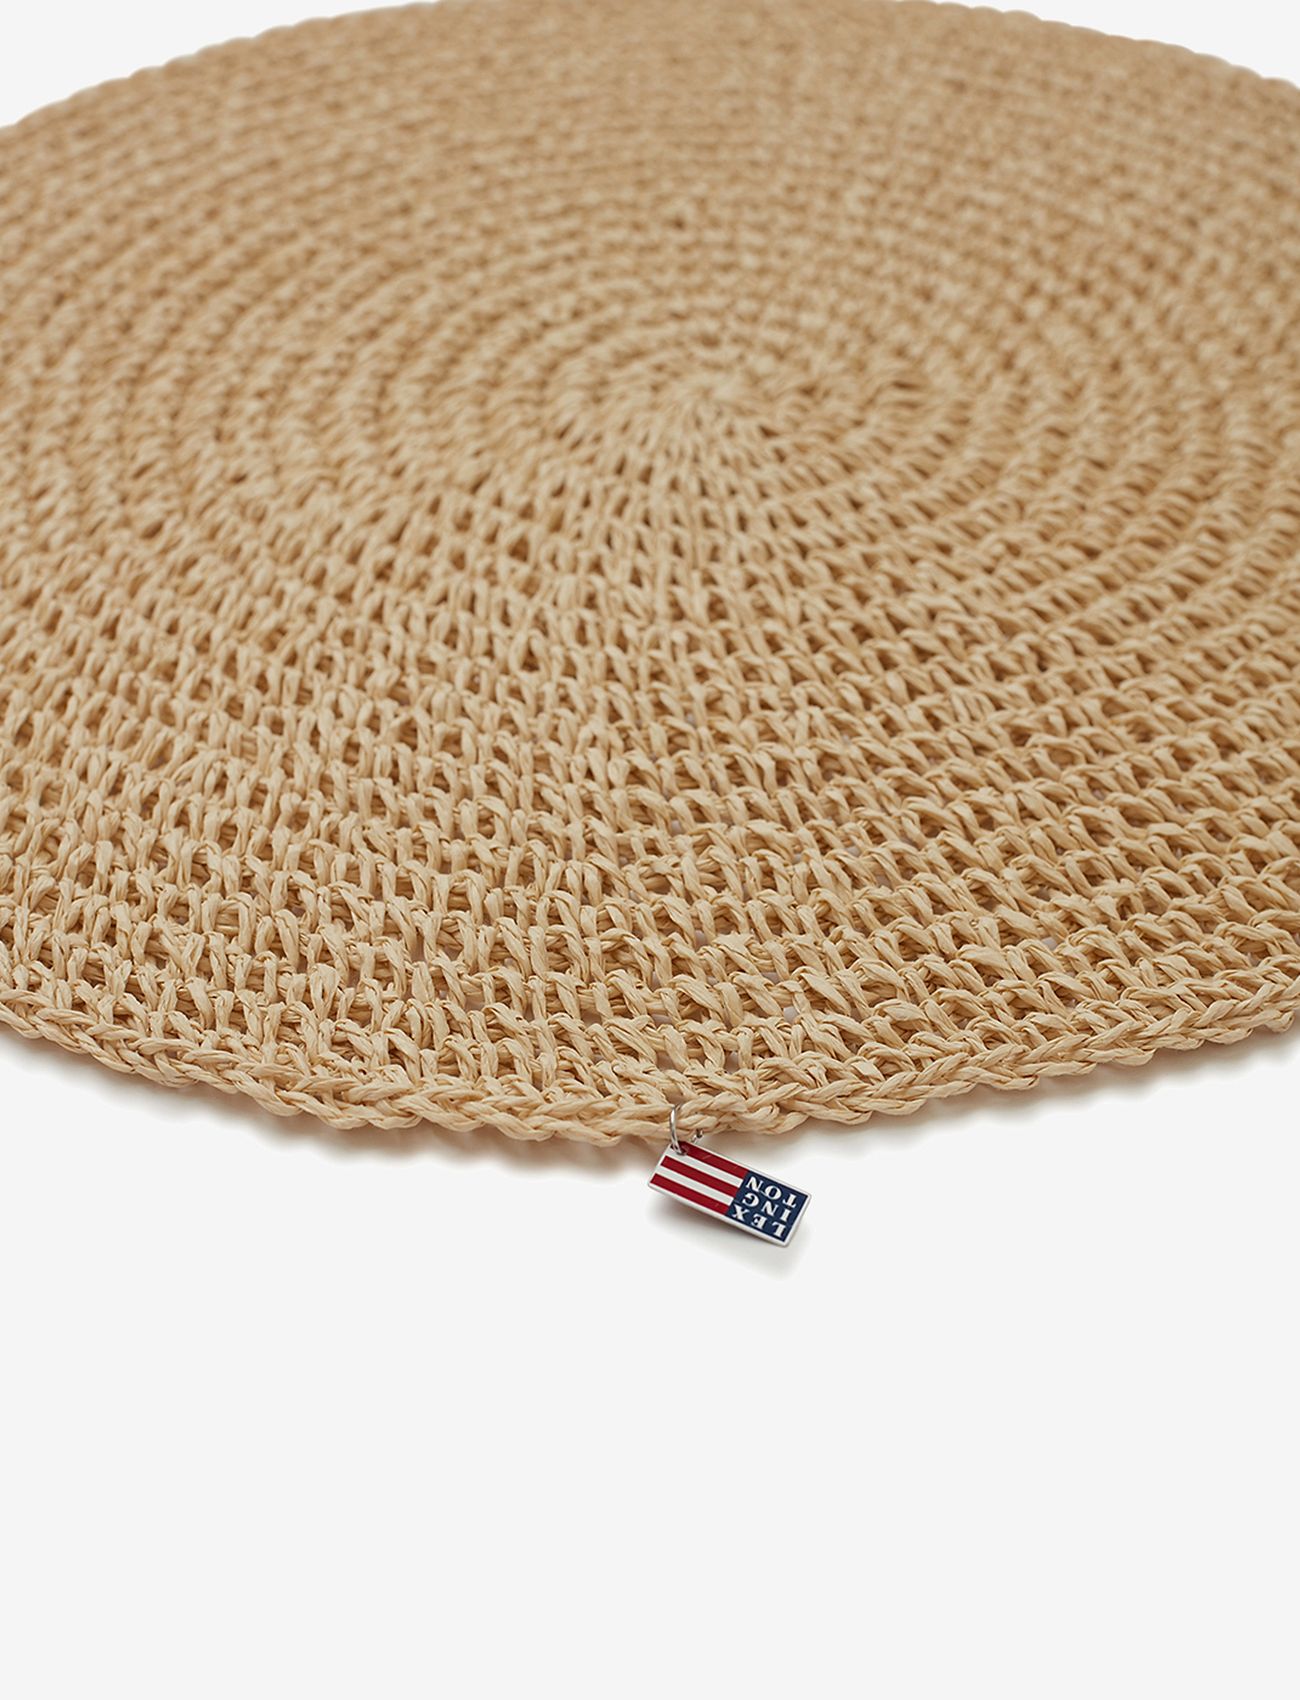 Lexington Home - Round Recycled Paper Straw Placemat - lägsta priserna - natural - 1